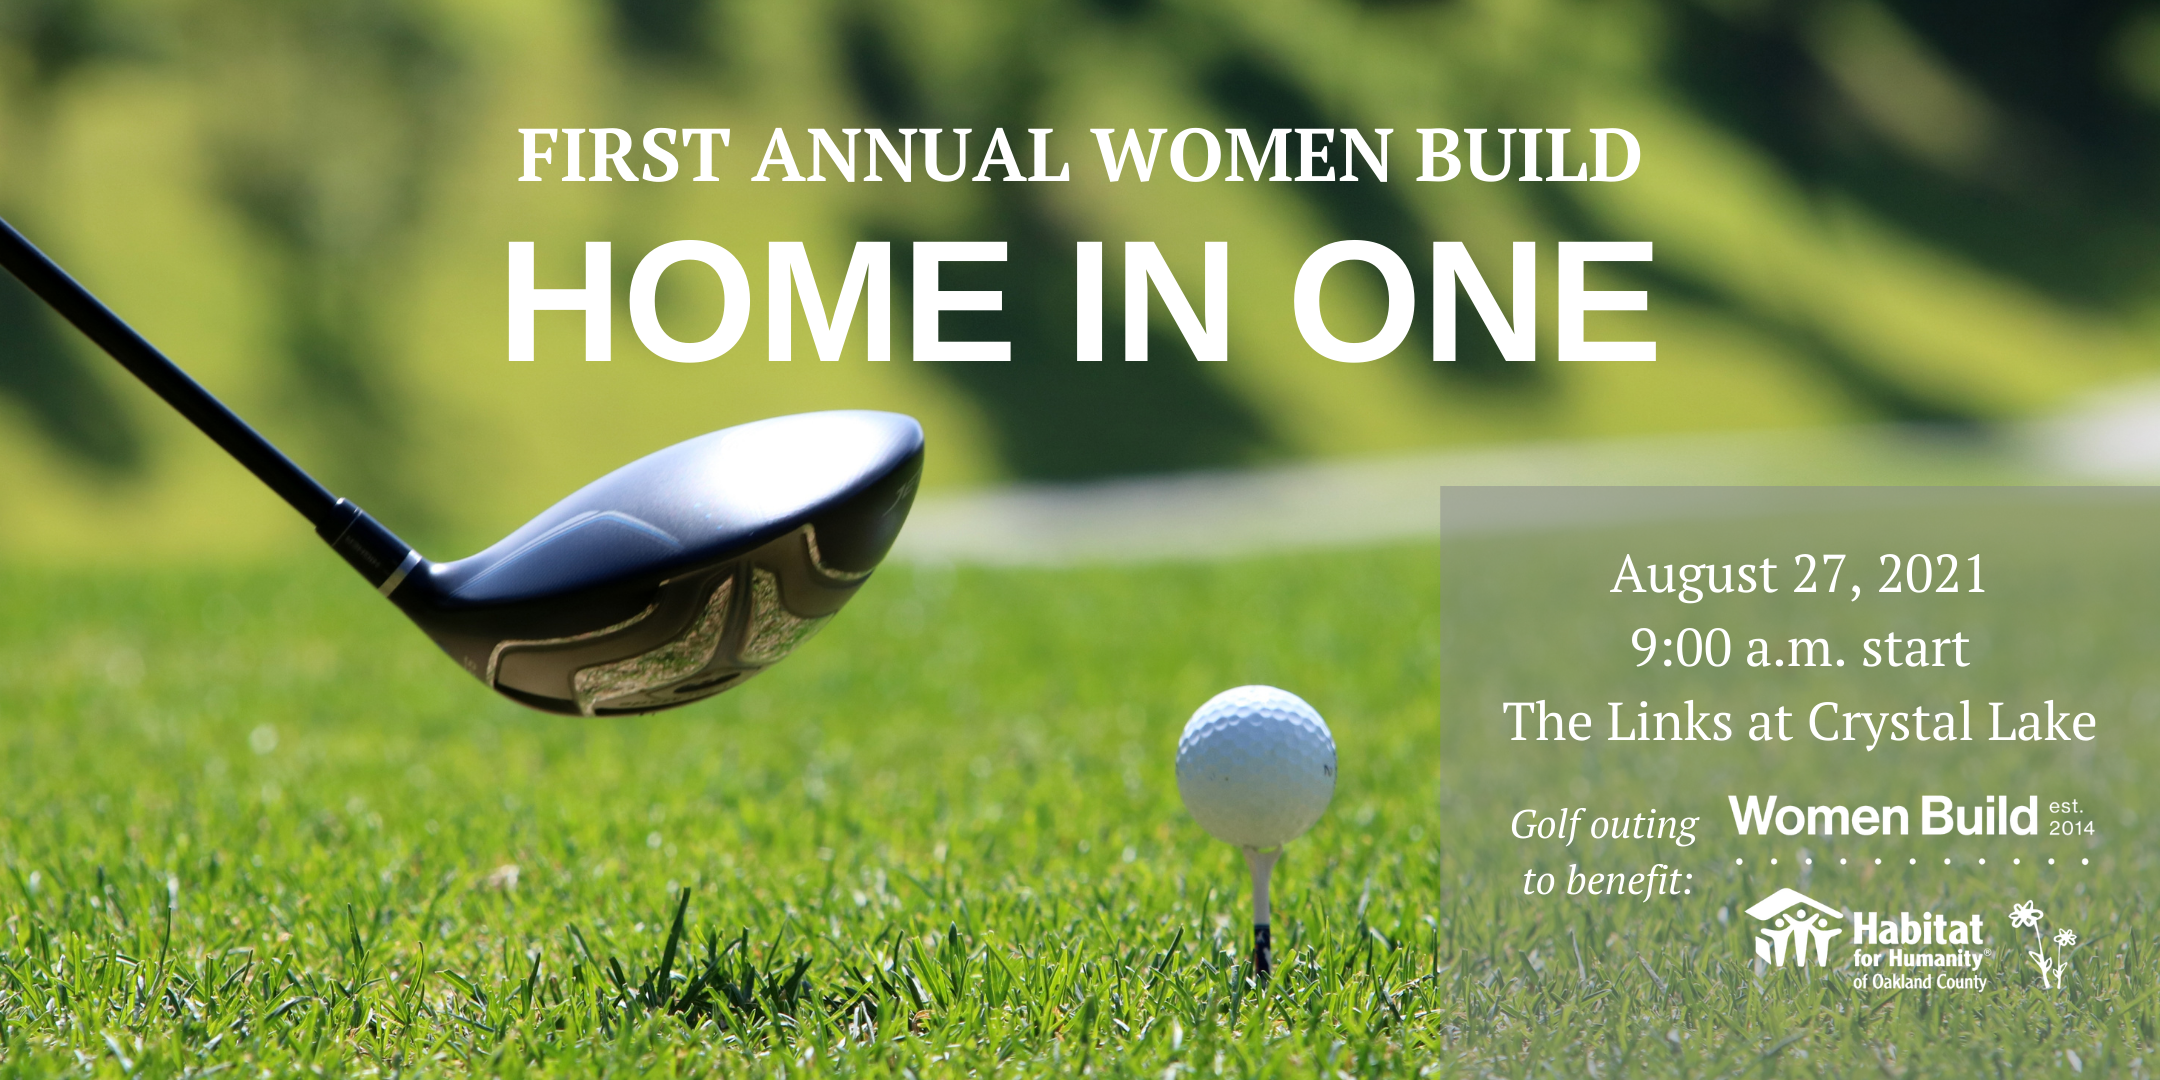 First Annual Women Build Home in One Golf Event